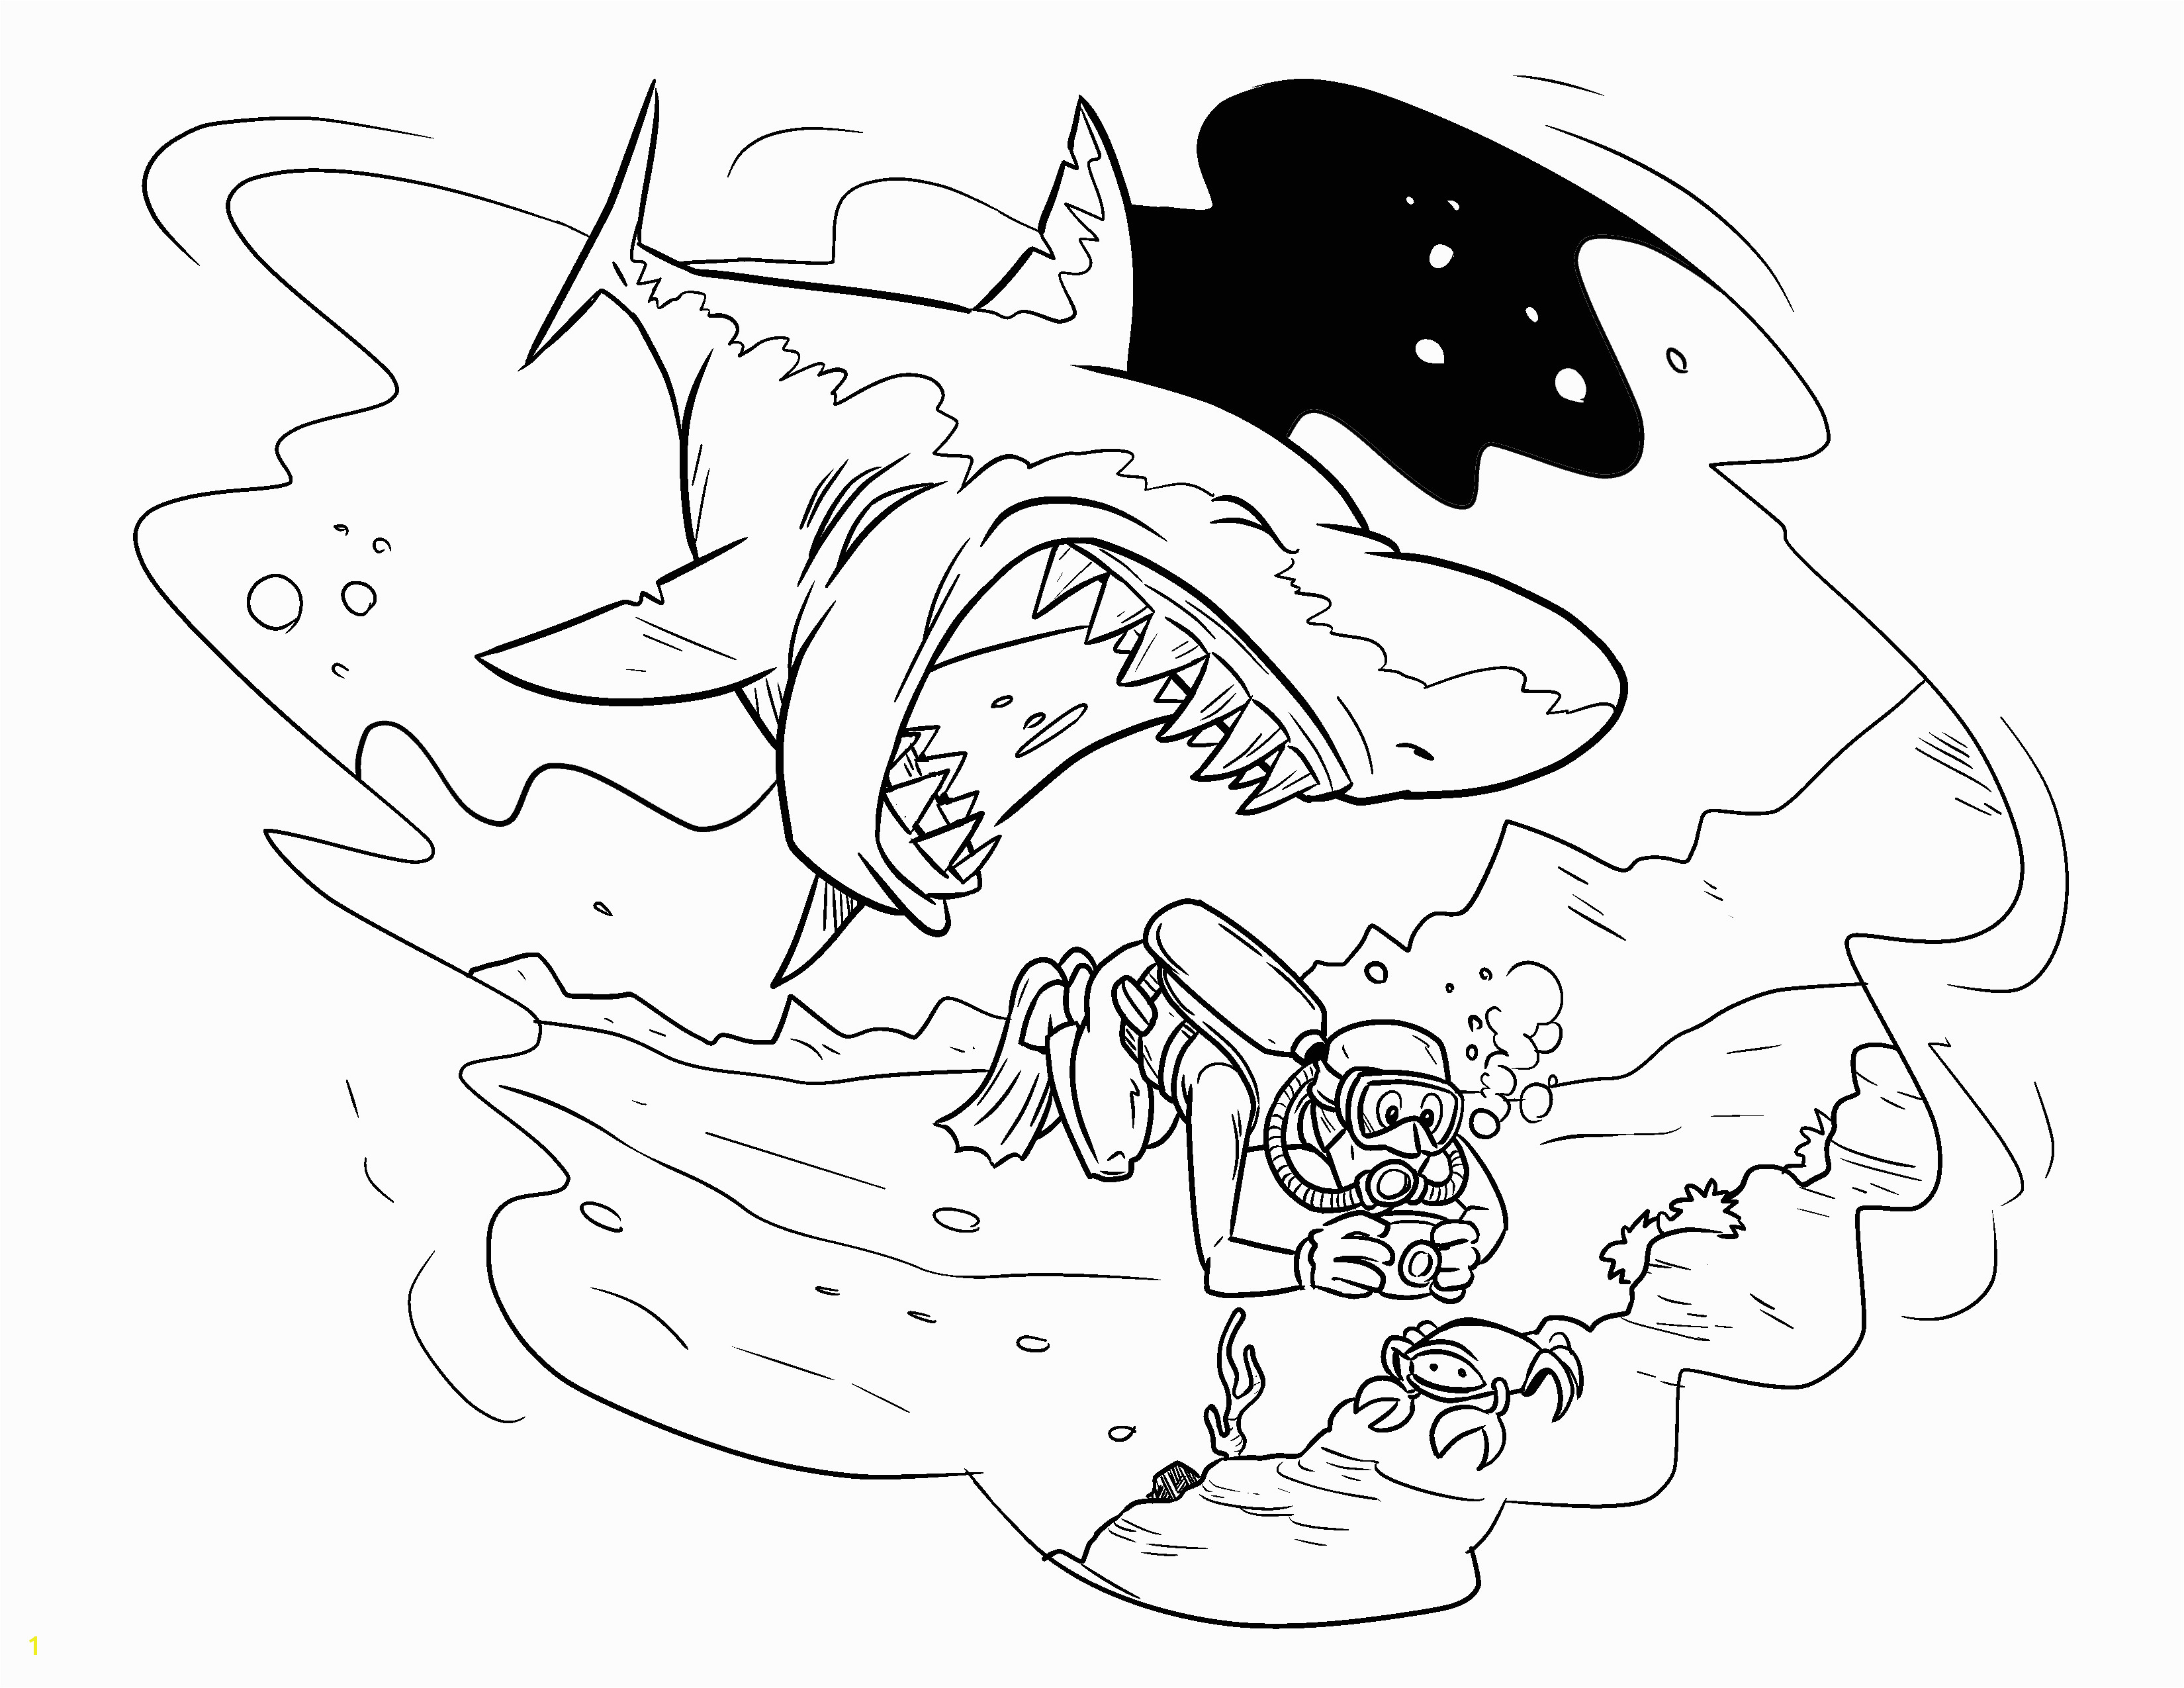 Jaws Coloring Pages Amazing Coloring Page Shark Ideas Resume Ideas Namanasa